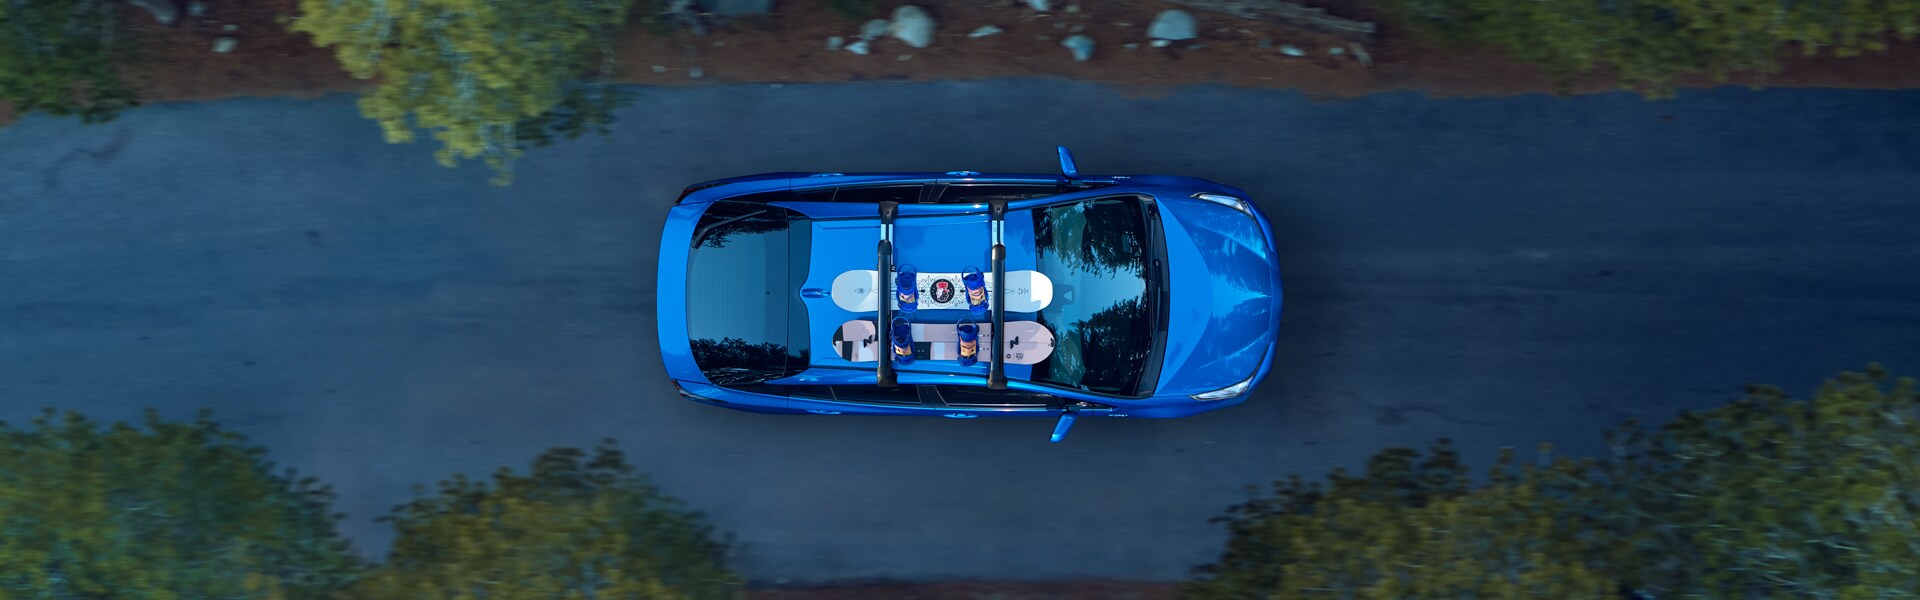 Defining APR at Bobby Rahal Toyota in Mechanicsburg, PA | The 2021 Toyota Prius XLE From a Bird's Eye View Driving Through a Forest With Two Snowboards Strapped to the Top